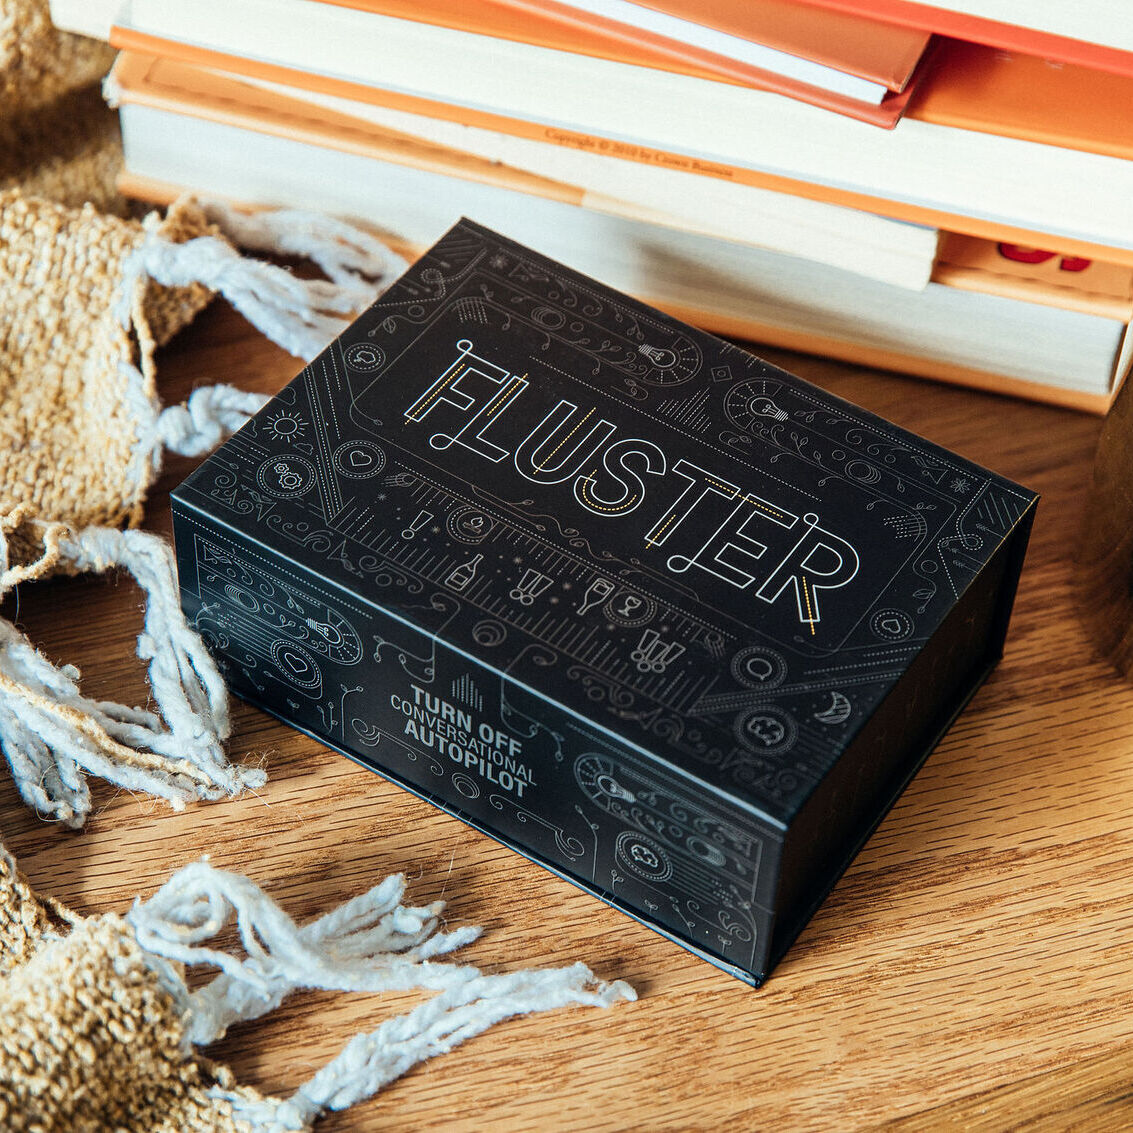 A FLUSTER card game box on a wood surface